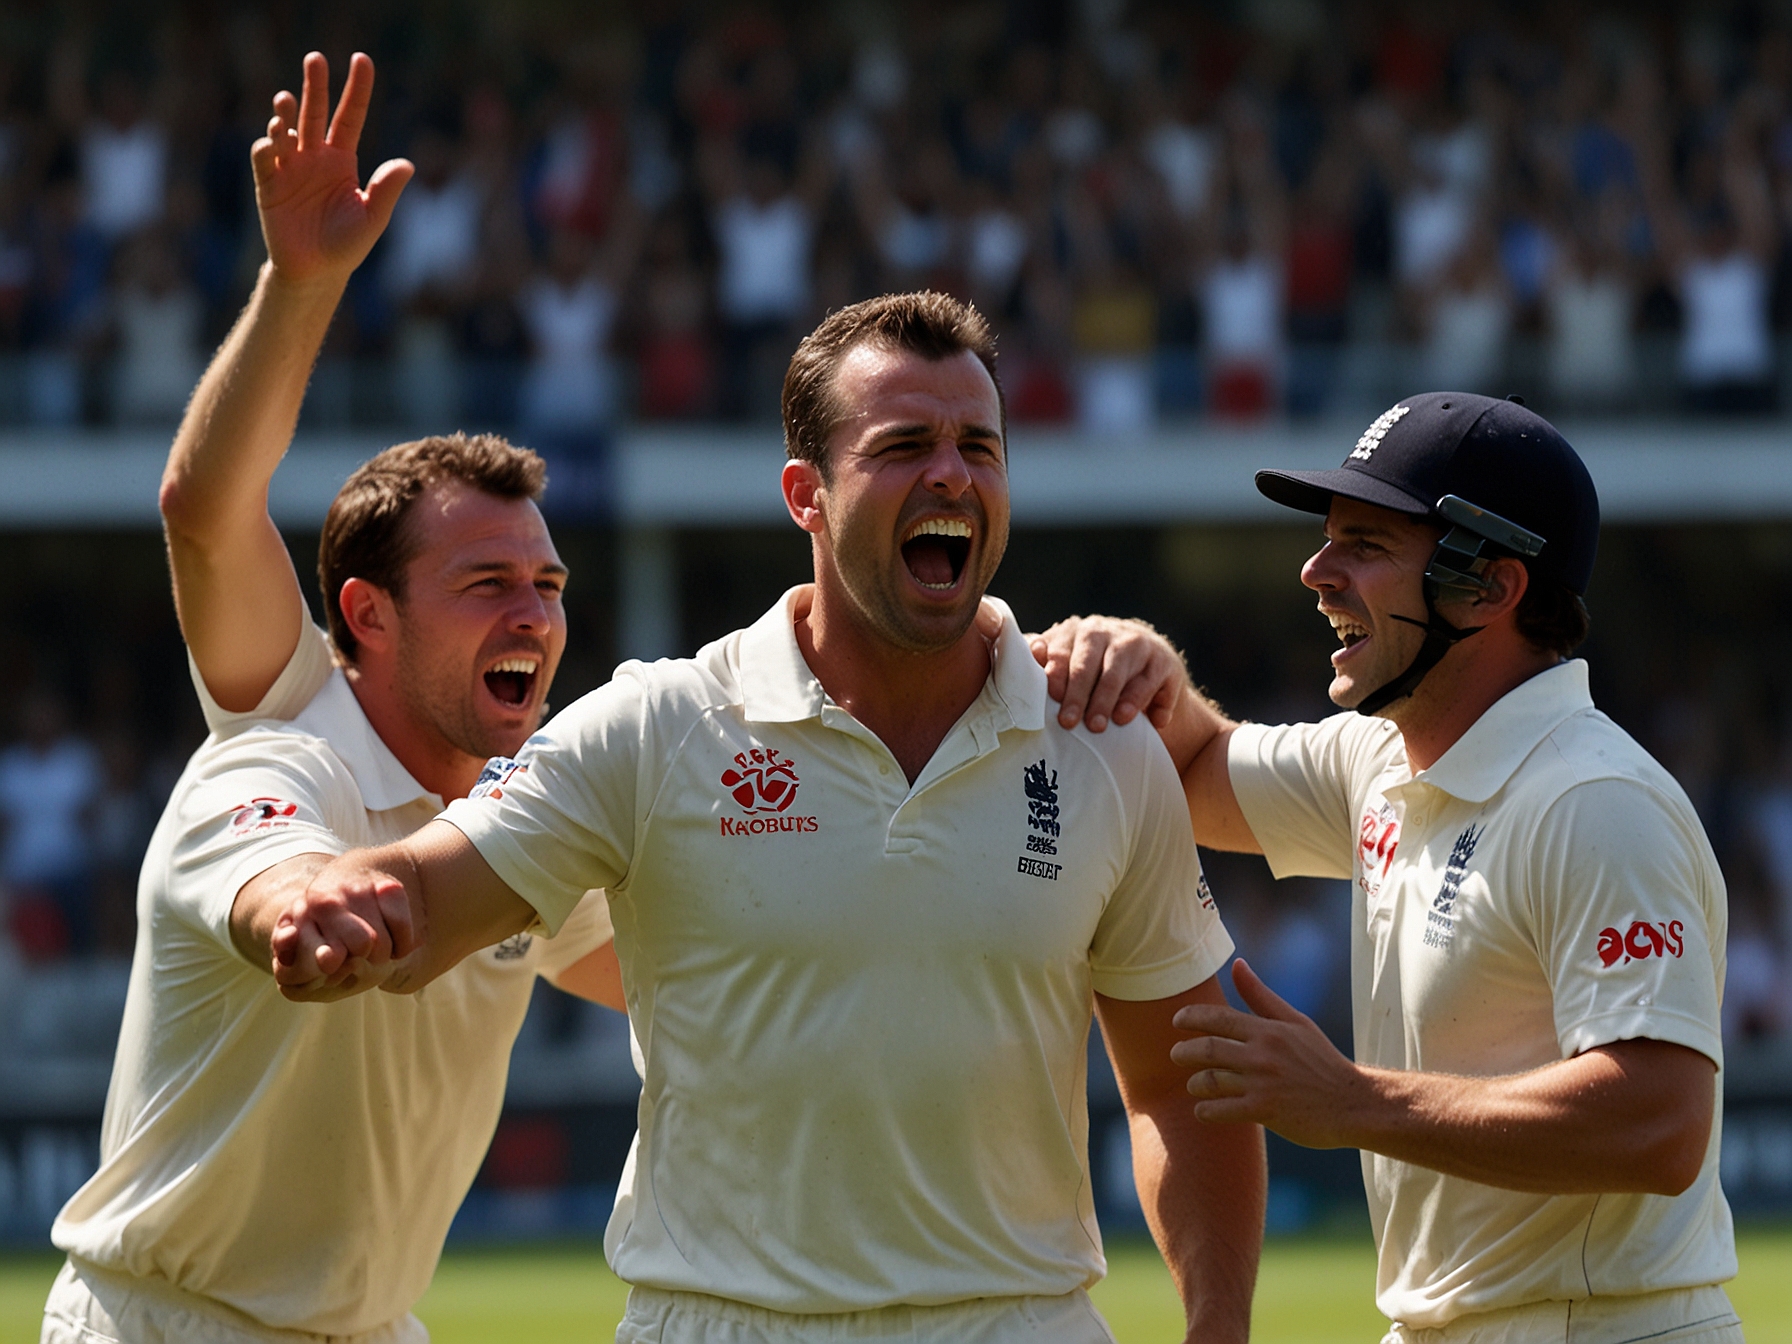 USA's Steven Taylor celebrates with teammates after taking a significant wicket, highlighting their spirited and tenacious play against the formidable England team.